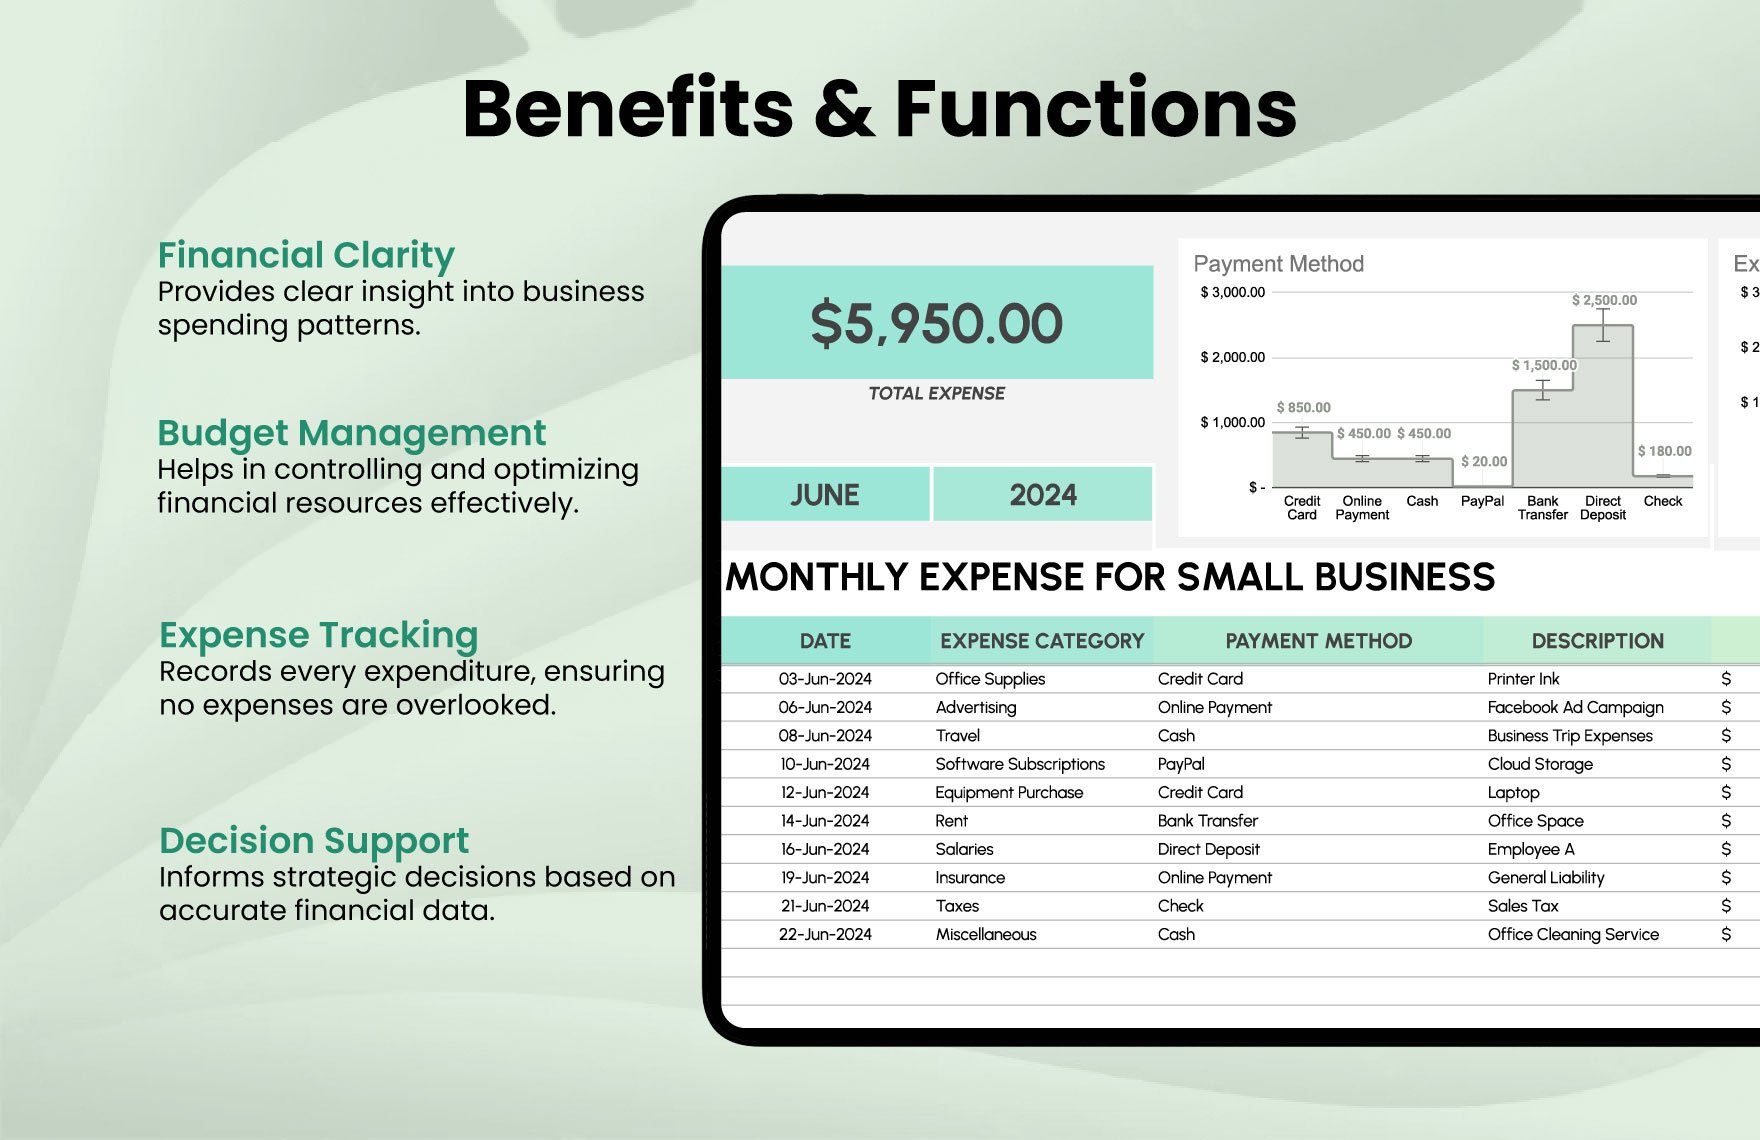 Monthly Expense for Small Business Template